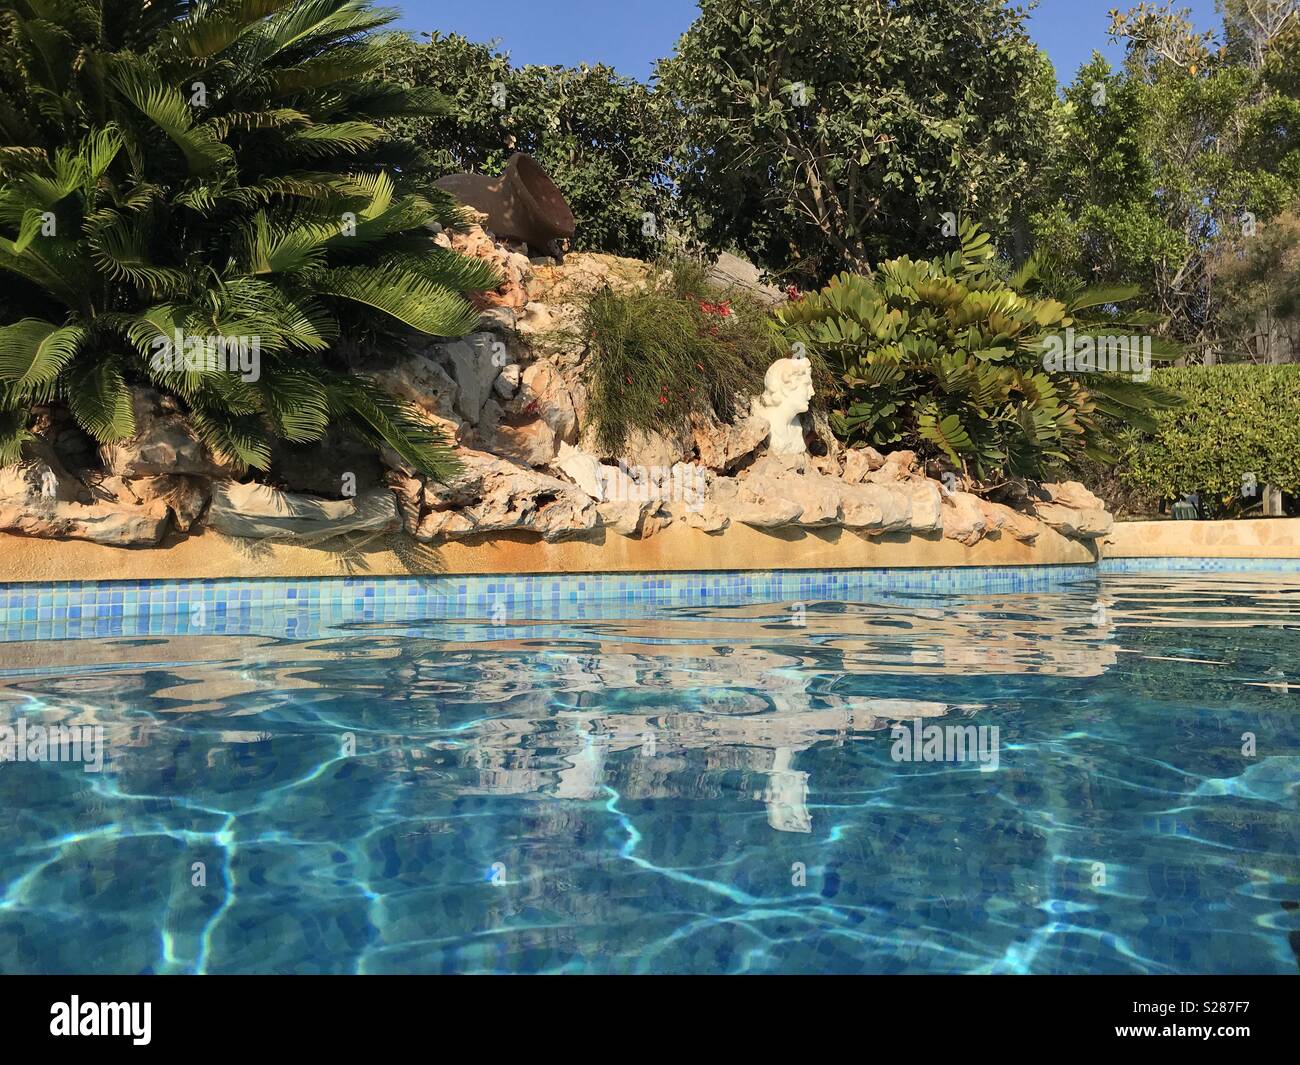 Swimming pool and rockery with a Sago palm (Cycas revoluta) and a Roman bust, in a Mediterranean garden, low angle view Stock Photo